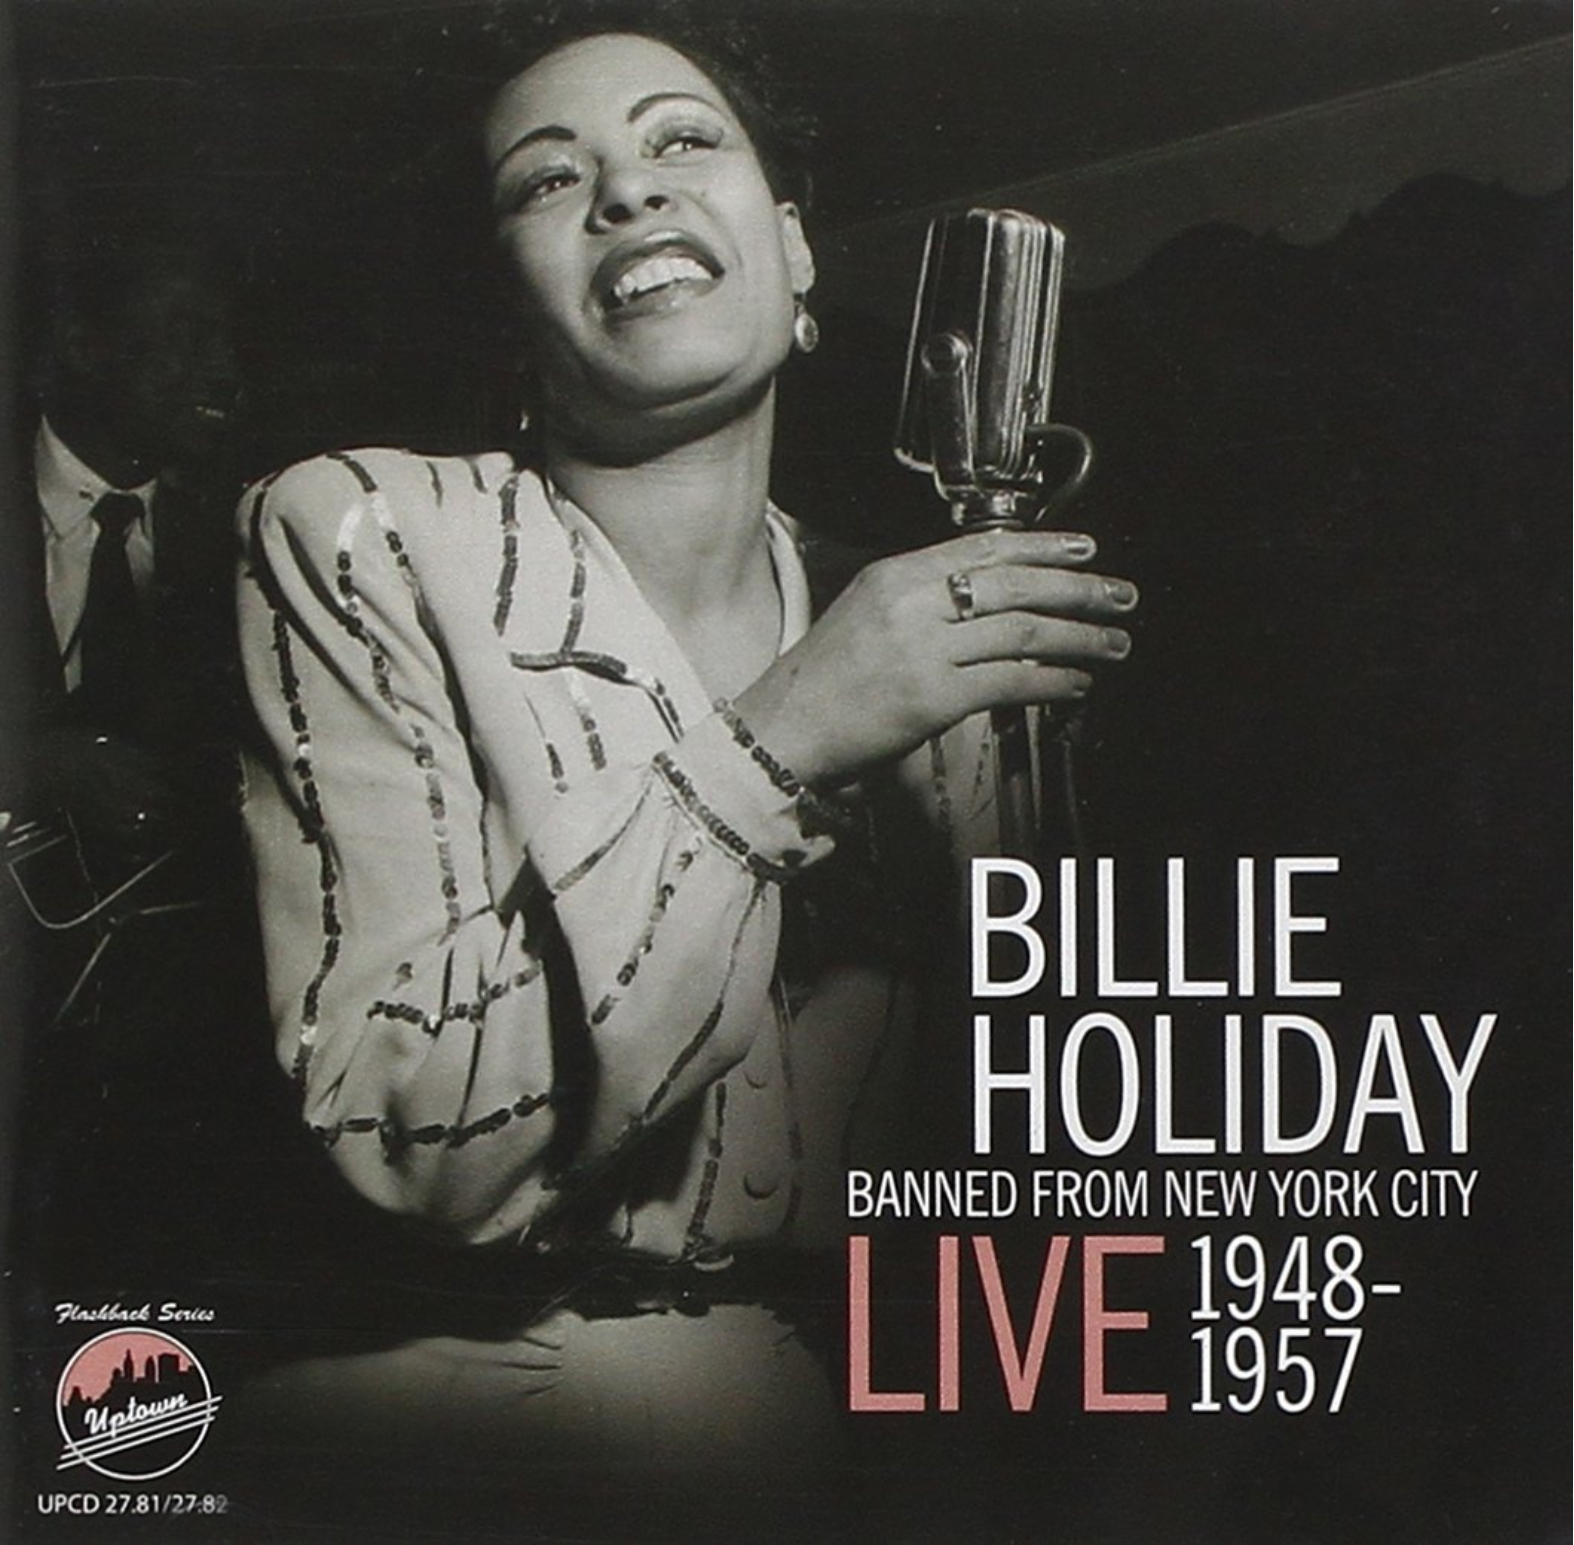 screen-snip_billie-holiday-banned_front.PNG